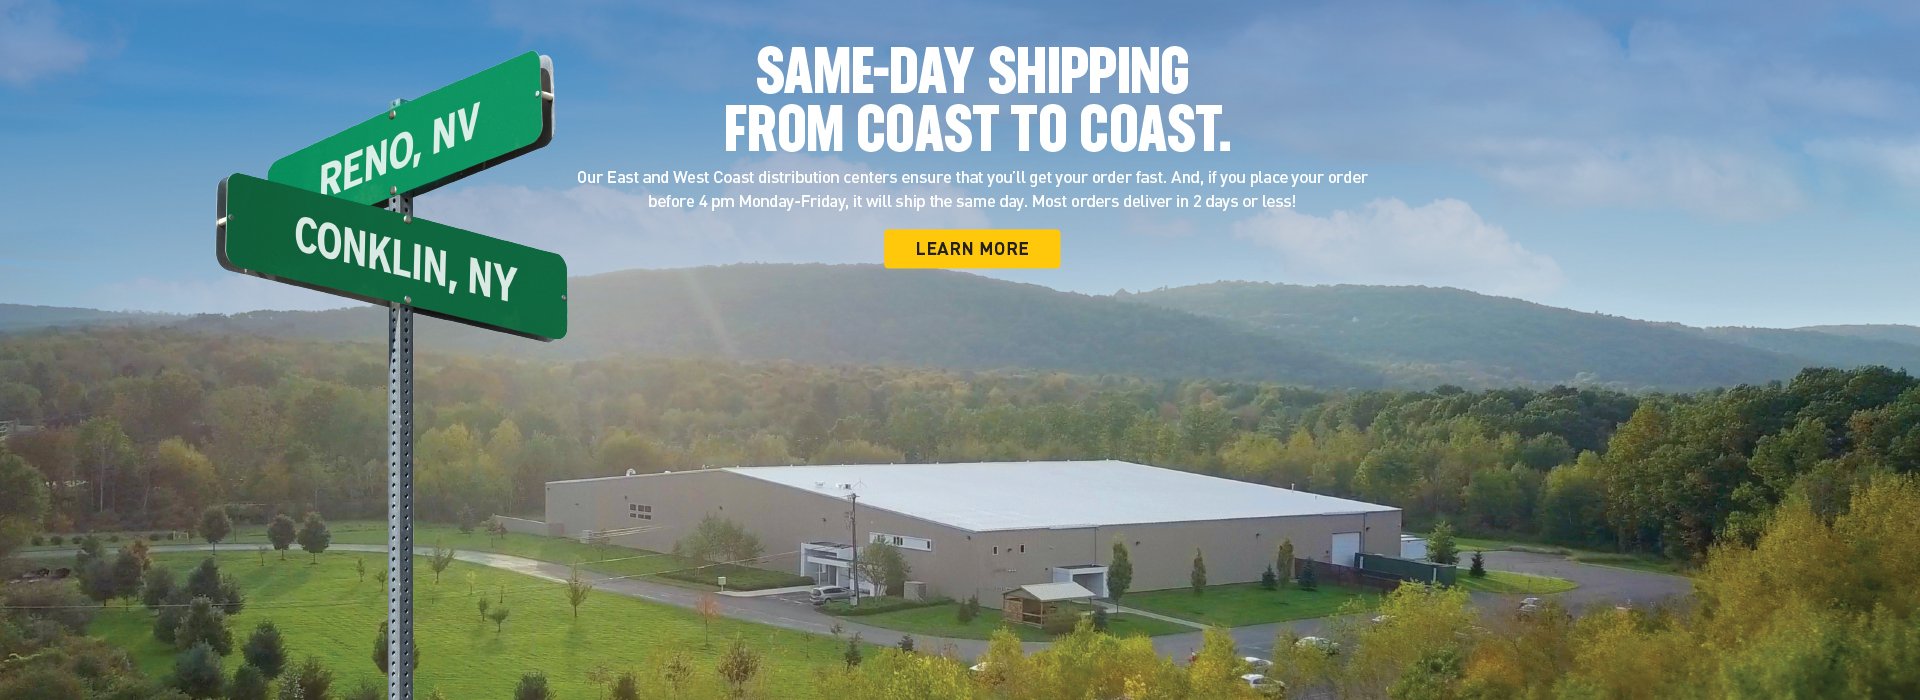 Fast Free Shipping Dry Cleaning Supplies | Fast Free Shipping Tailoring Supplies | Fast Free Shipping Laundry Supplies | Same Day Shipping From Coast To Coast. Our East and West Coast distribution centers ensure that you’ll get your order fast. And, if you place you order before 4 pm Monday-Friday, it will ship the same day. Most orders deliver in 2 days or less!